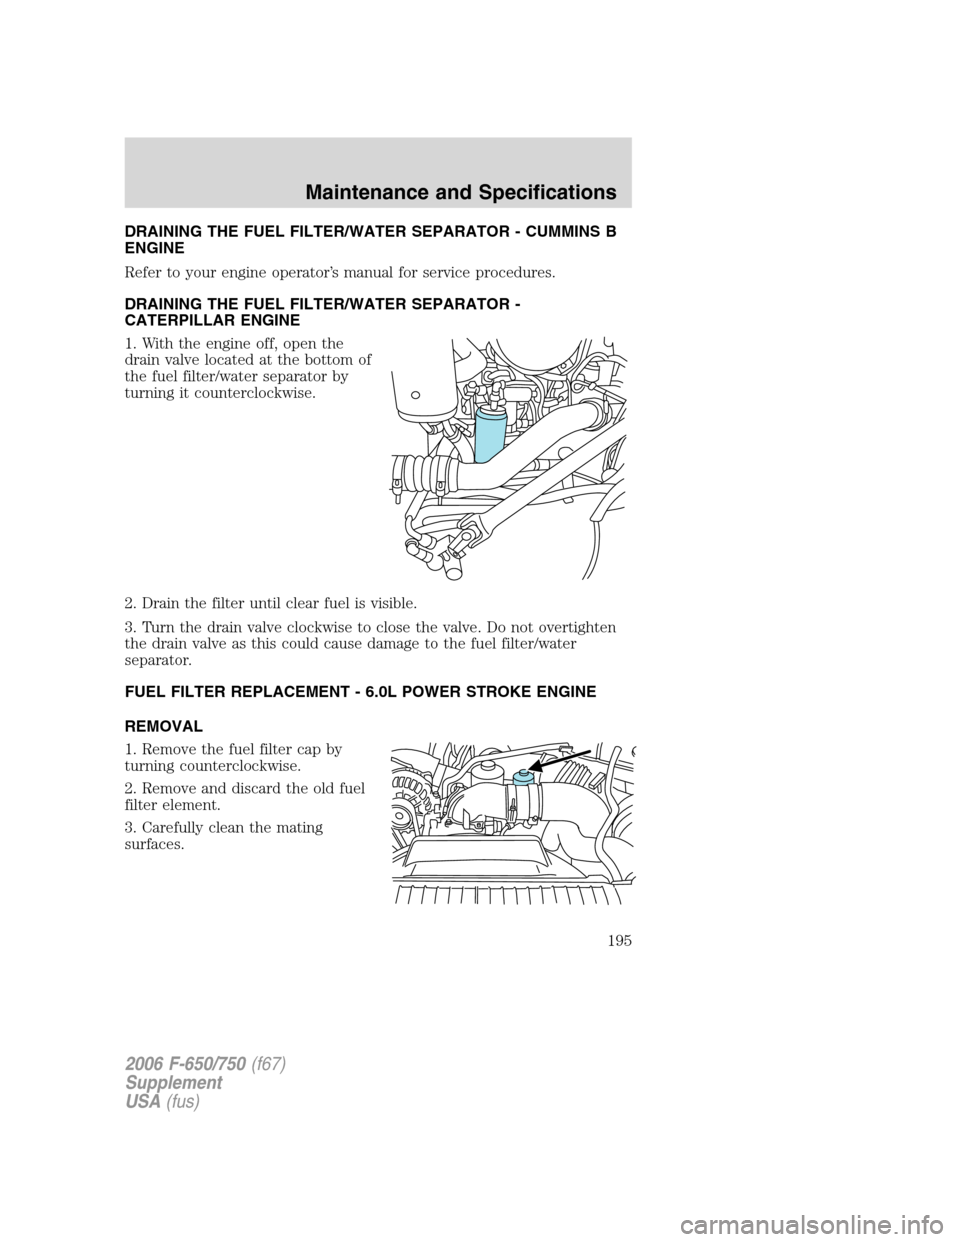 FORD F750 2006 11.G Service Manual DRAINING THE FUEL FILTER/WATER SEPARATOR - CUMMINS B
ENGINE
Refer to your engine operator’s manual for service procedures.
DRAINING THE FUEL FILTER/WATER SEPARATOR -
CATERPILLAR ENGINE
1. With the e